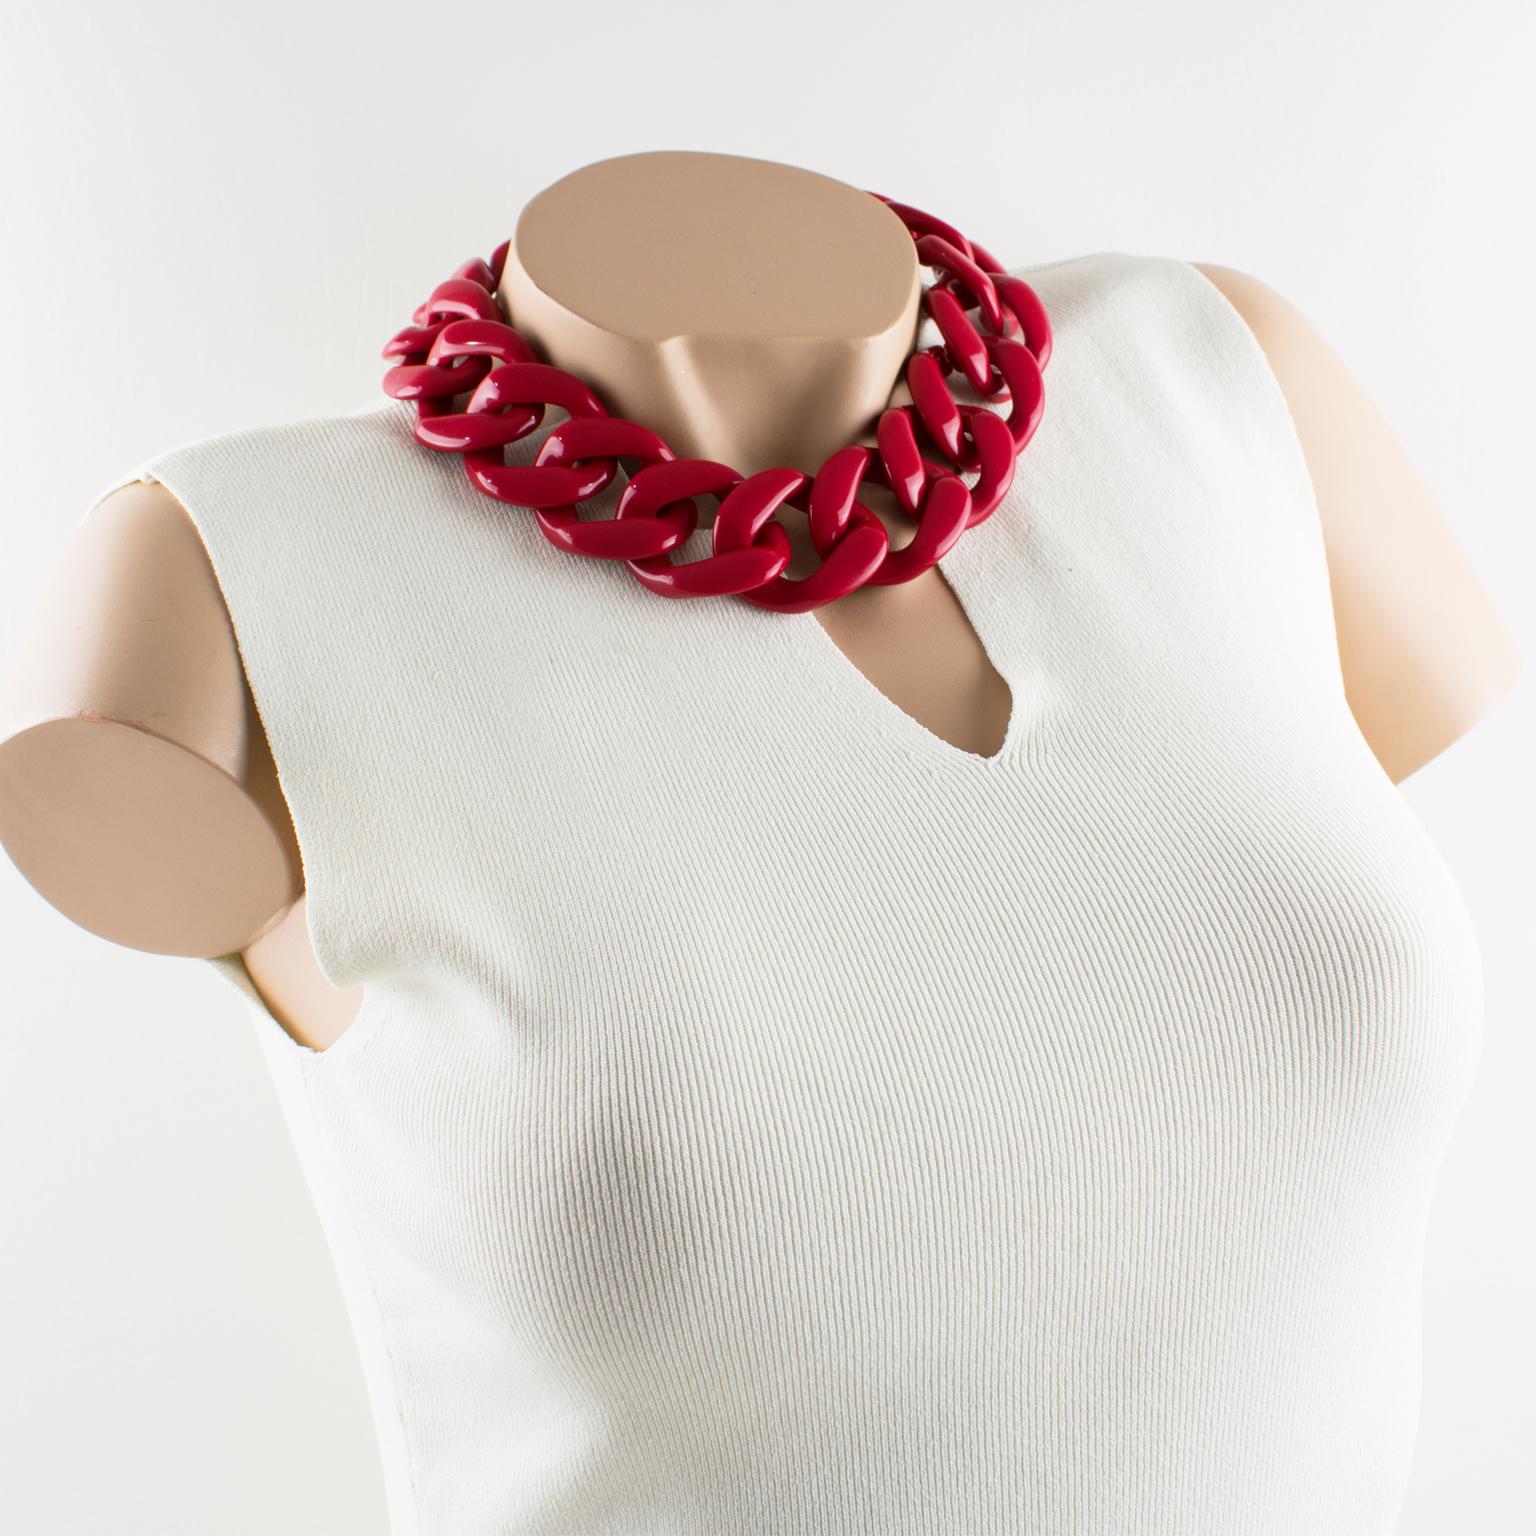 Adorable Angela Caputi, made in Italy choker necklace. Extra-large flat chain design in magenta red resin. Her matching of colors is always bold and extremely classy.
As you know Caputi jewelry is not signed. This is a pre-owned necklace and the